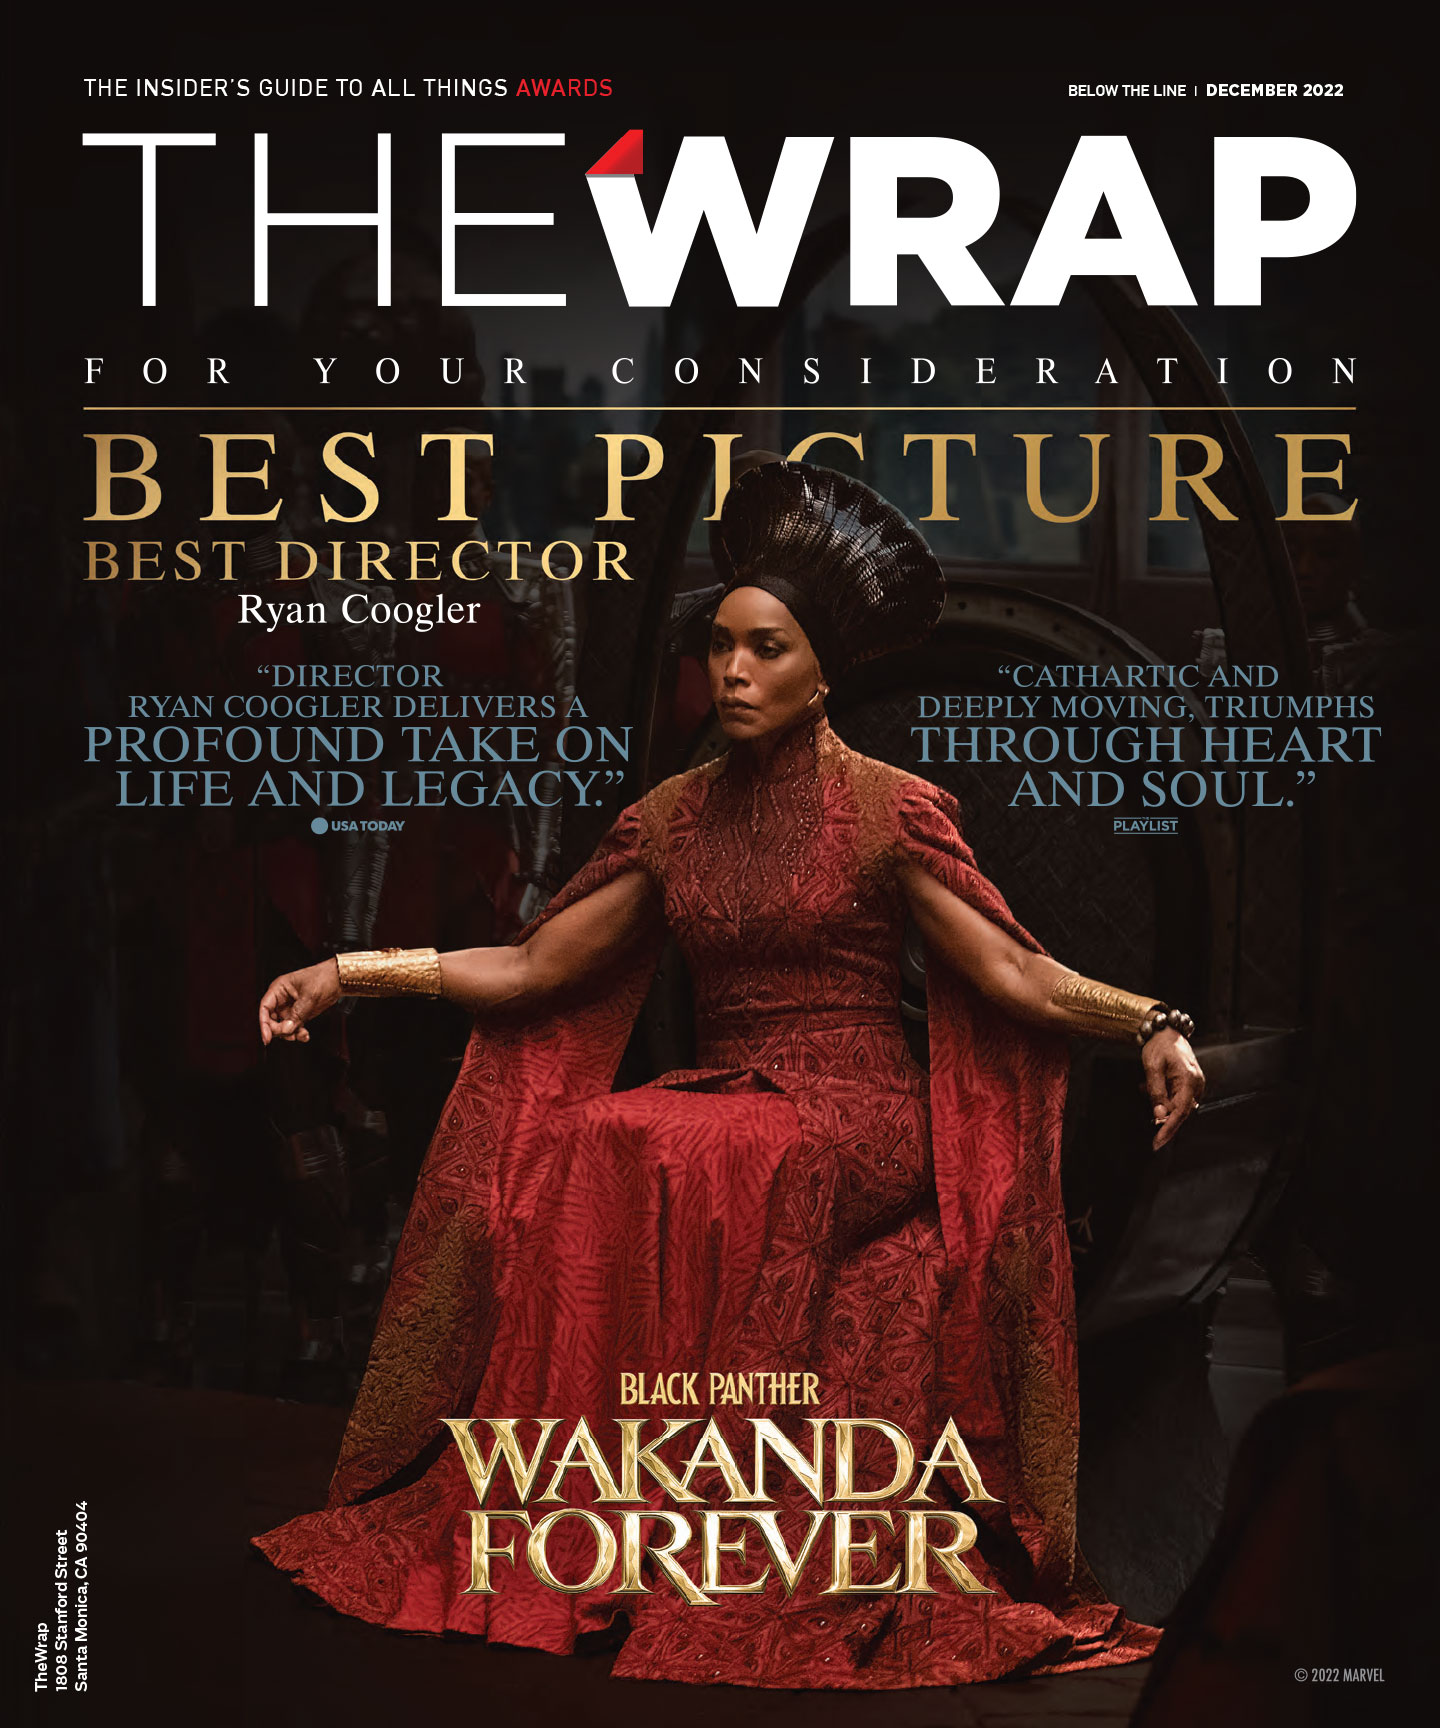 The Wrap Cover - December 2022